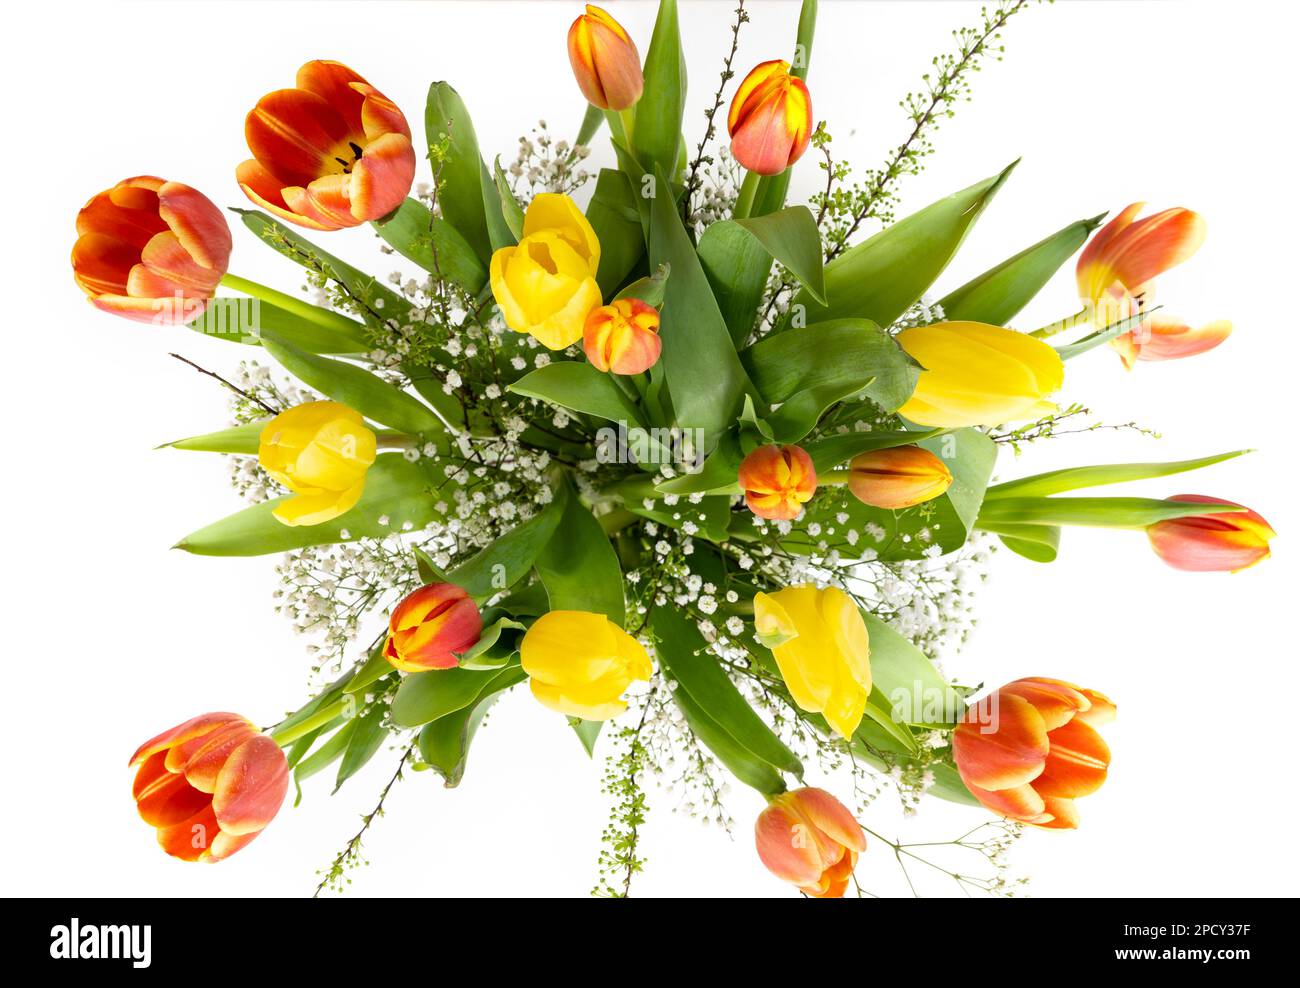 Spring flower bouquet with yellow and red tulips, high angle view from above, white background, holiday gift or greeting card, selected focus, narrow Stock Photo